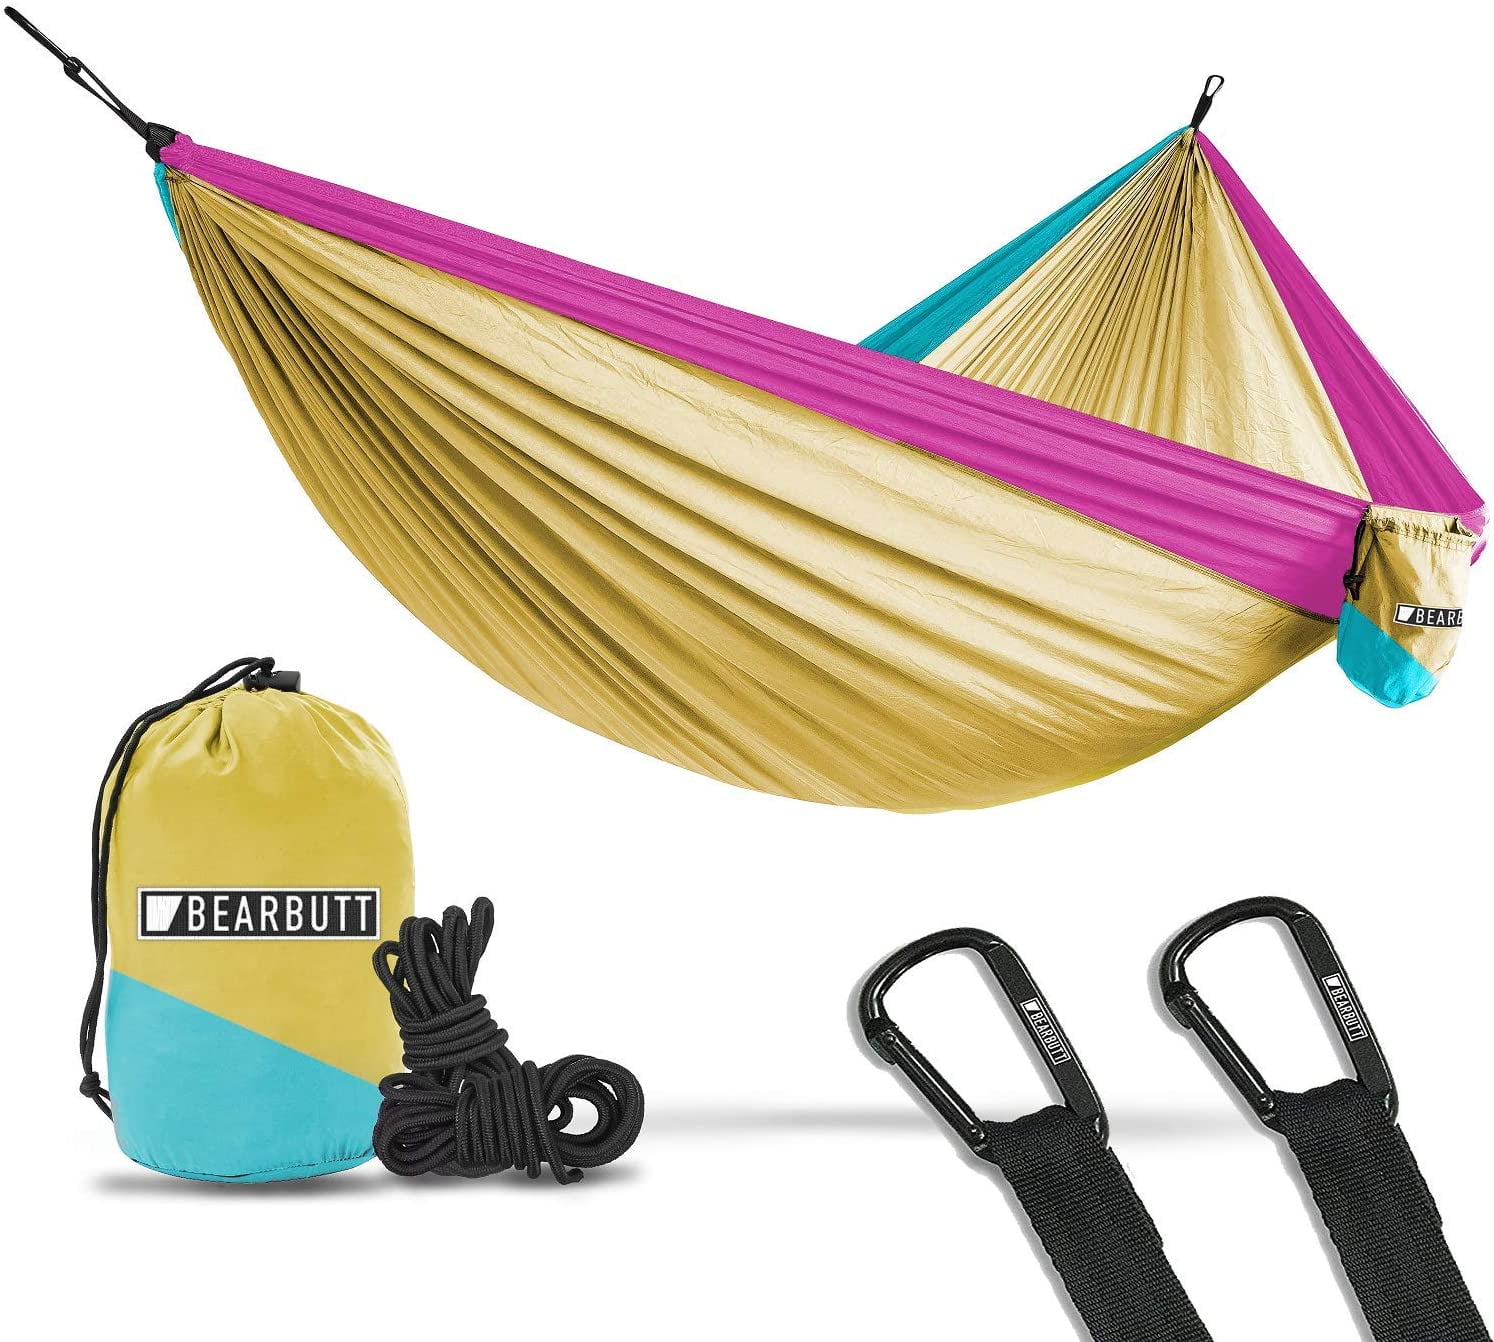 BEMAIN Camping Hammock Outdoor Lightweight Double & Single Portable Nylon Parachute Hammocks for Hiking Travel Beach Yard Gear Includes Straps and Steel Carabiners Champagne Gold/Yellow,Full 